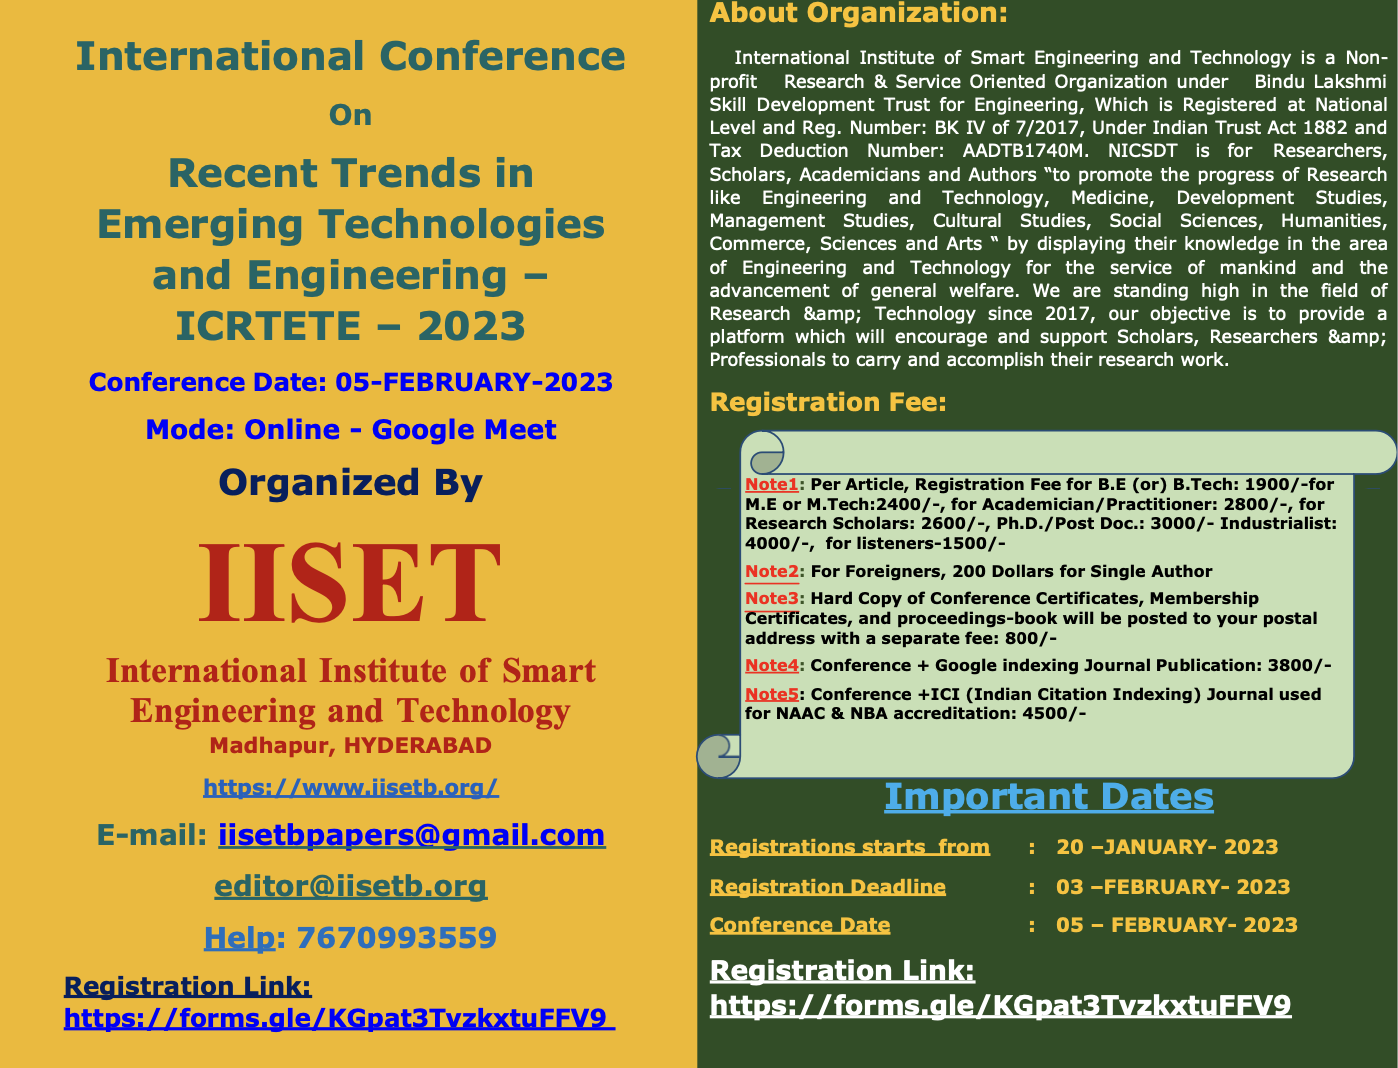 International Conference On Recent Trends in Emerging Technologies and Engineering ICRTETE 2023